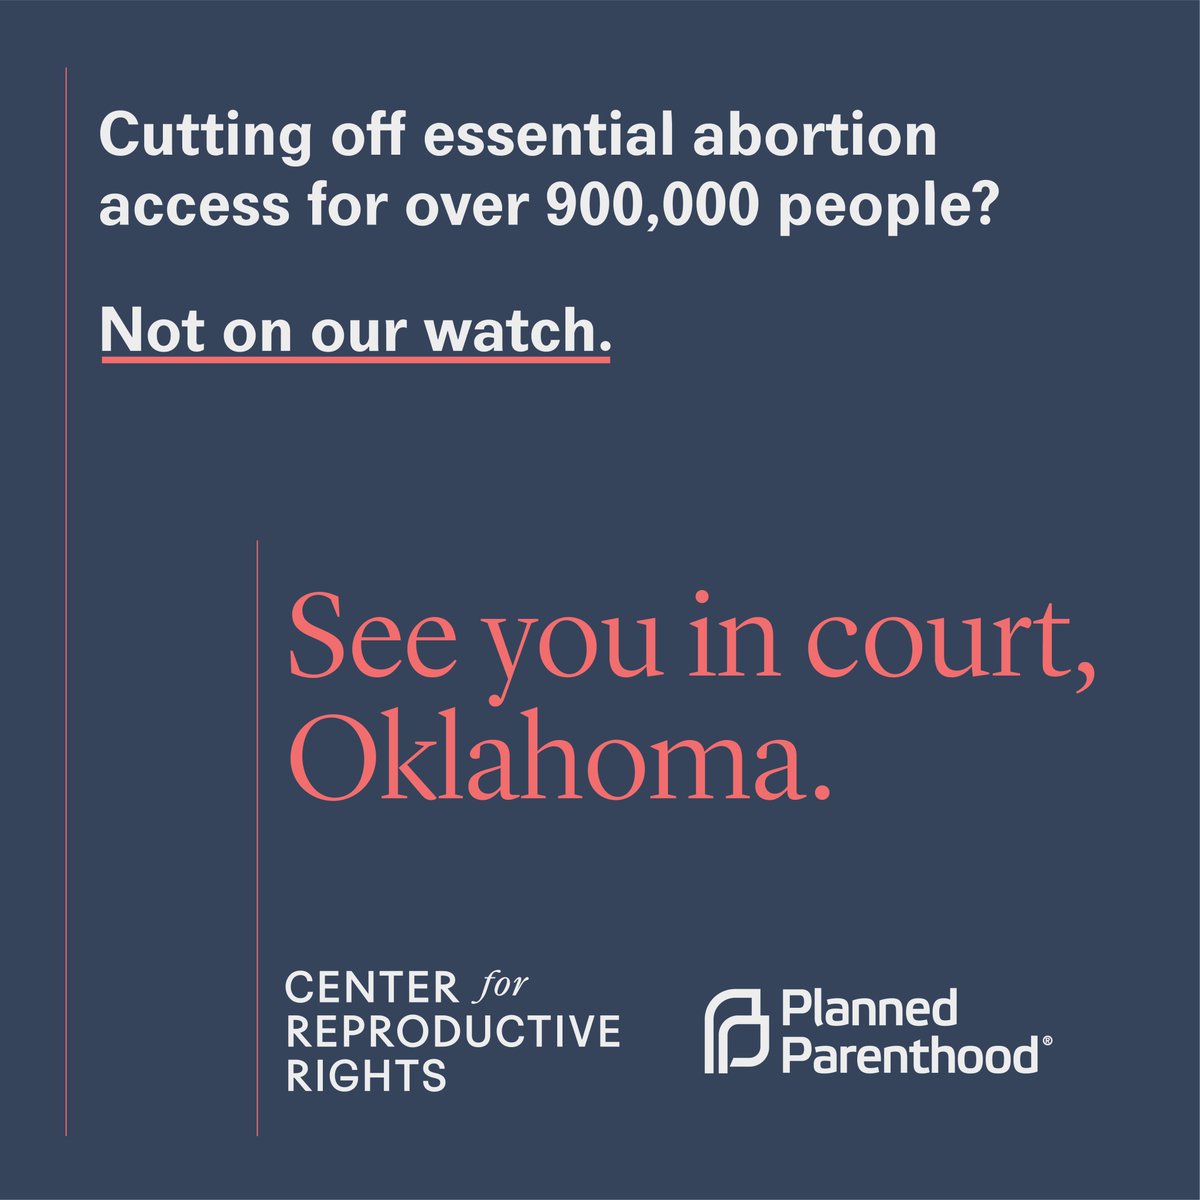 Oklahoma just passed an unconstitutional abortion ban — and this one is set to take effect immediately when Gov. Stitt signs. But we're fighting back. We are going to court to stop this ban w/ @reprorights.